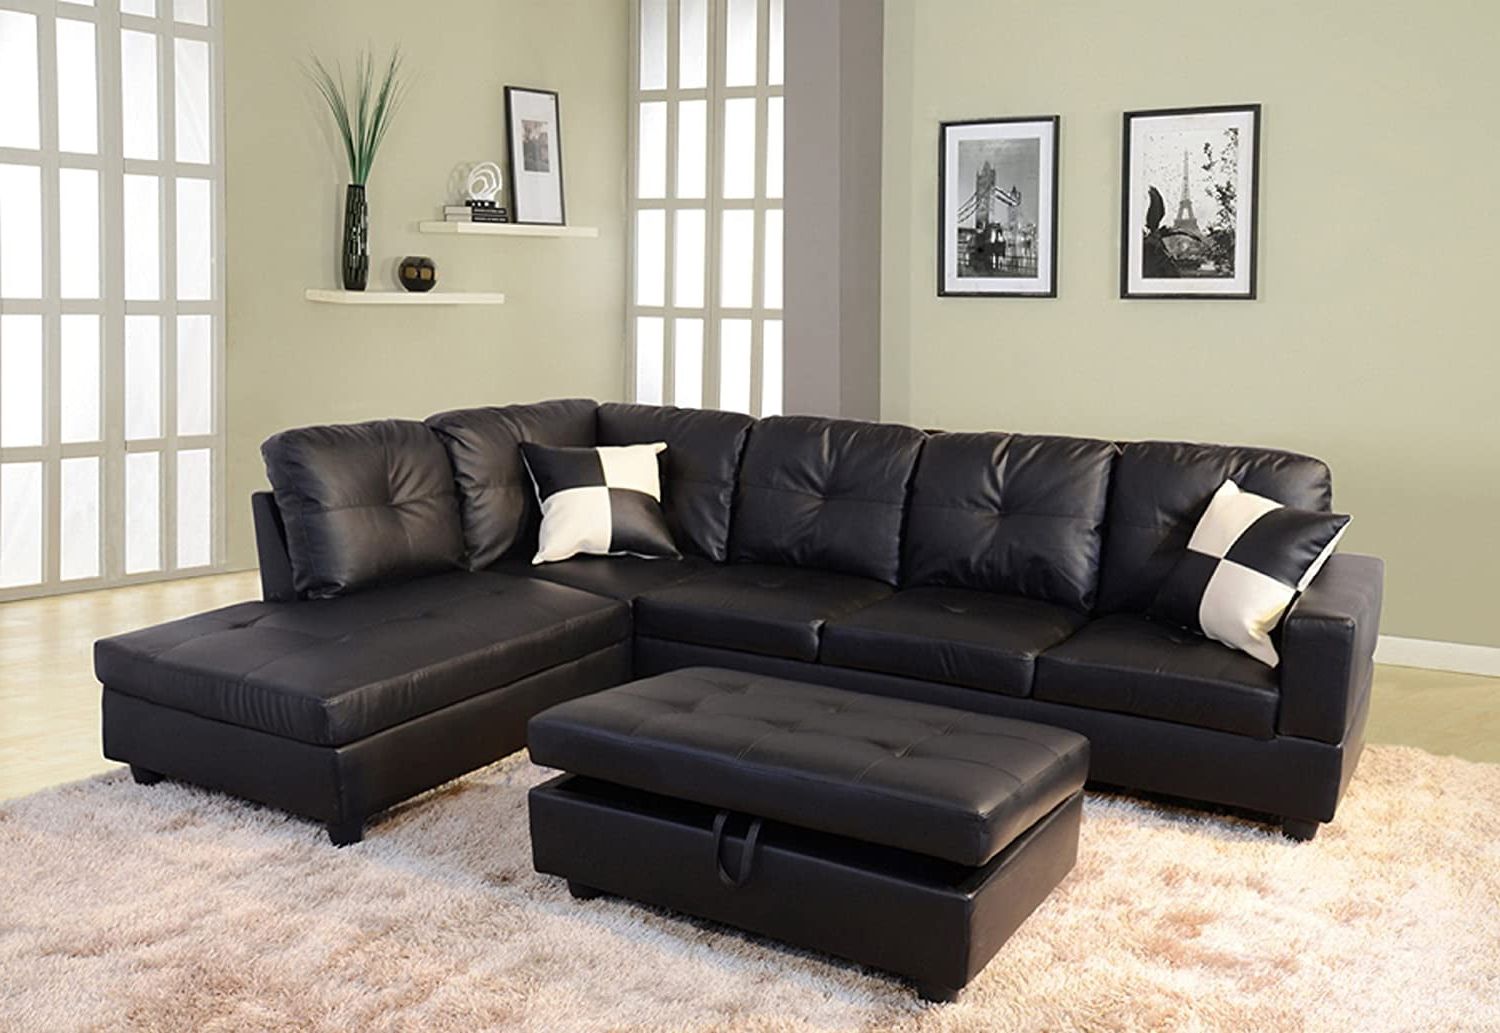 Dae Right Facing Sectional Sofa, L Shape Faux Leather Sectional Sofa Inside Faux Leather Sectional Sofa Sets (View 13 of 20)